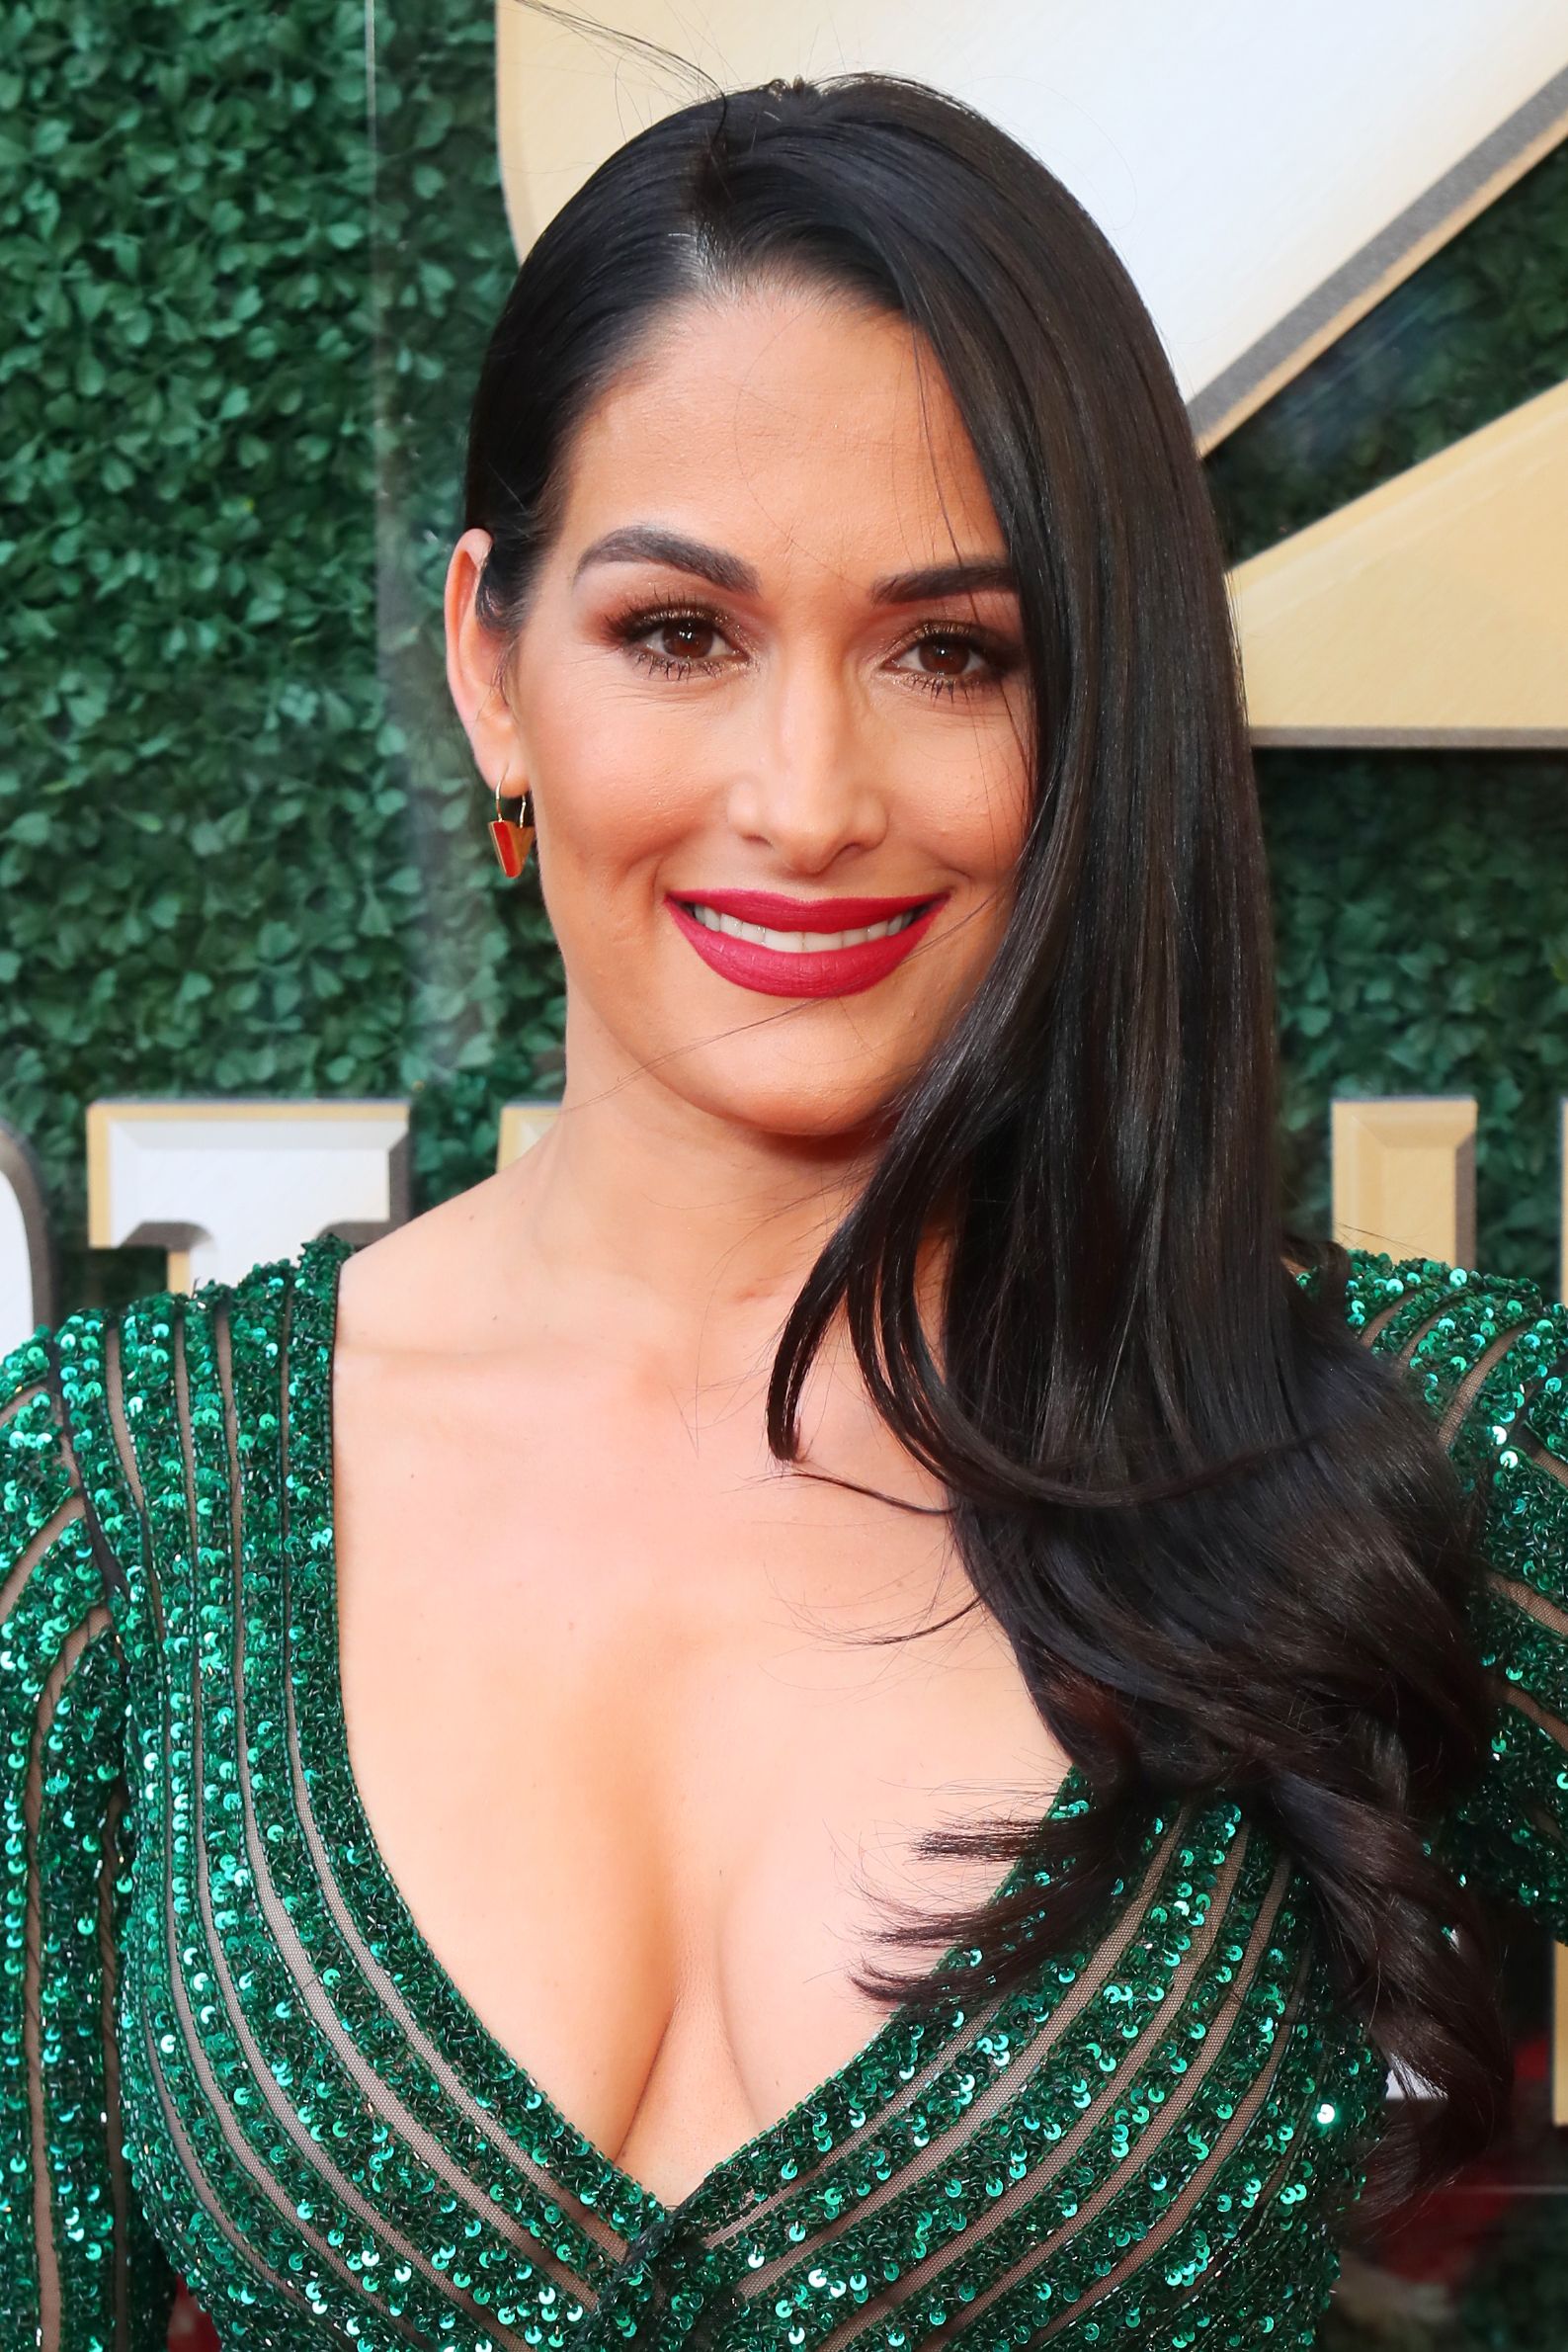 Nikki Bella Is Officially Retiring From Wrestling And The WWE